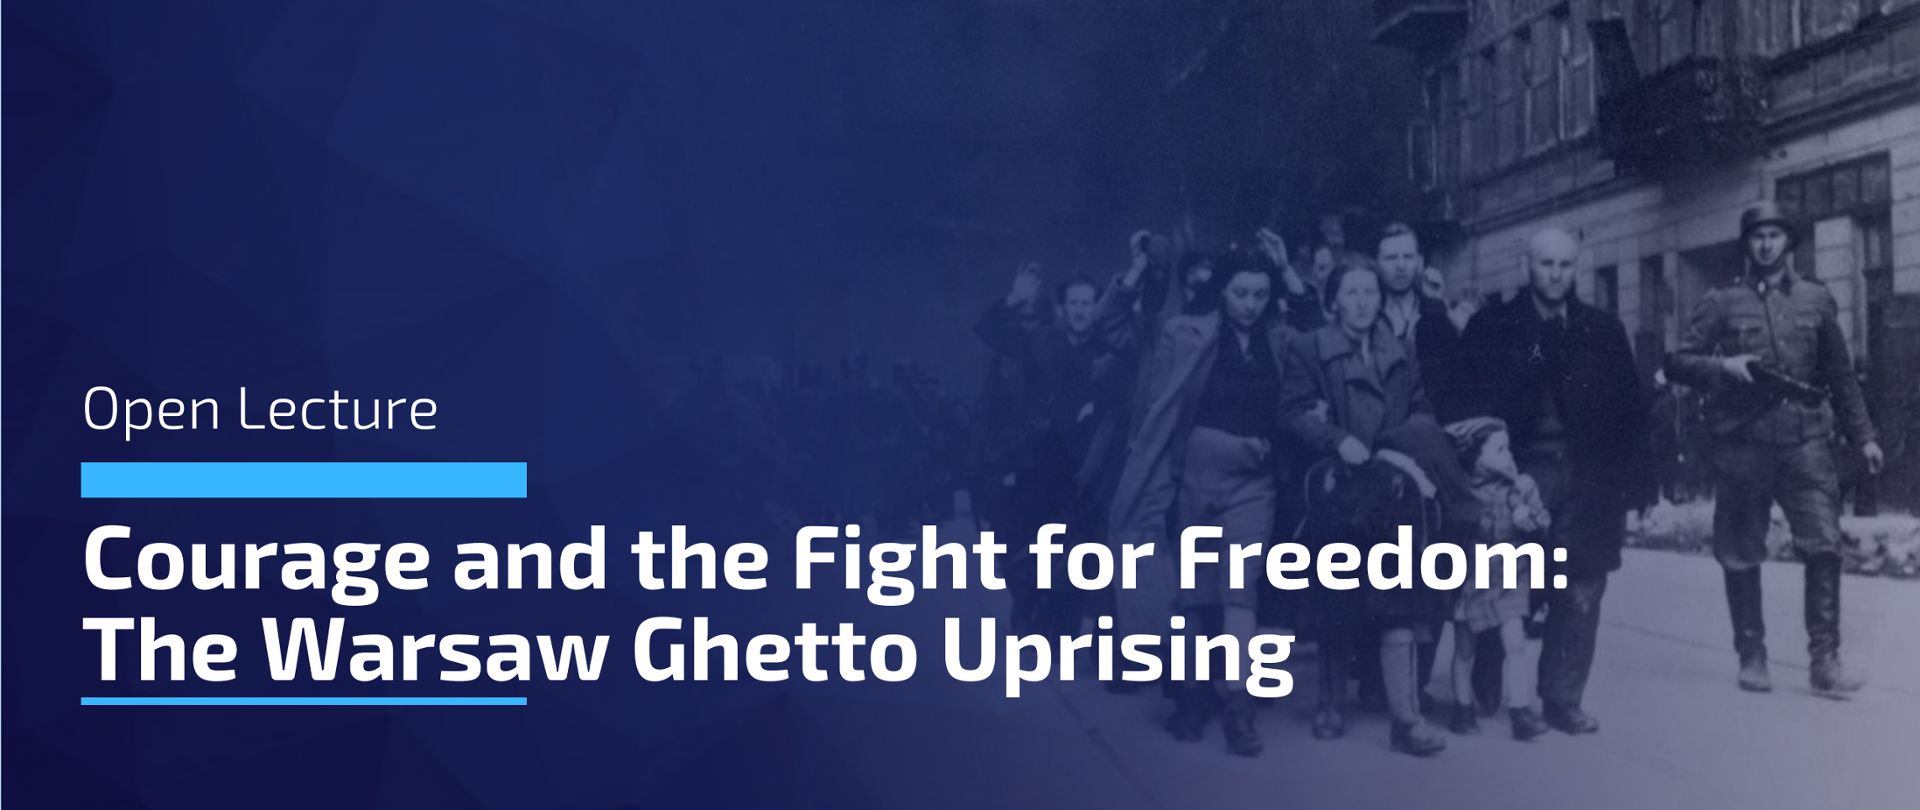 Open Lecture "Courage and the Fight for Freedom: The Warsaw Ghetto Uprising"